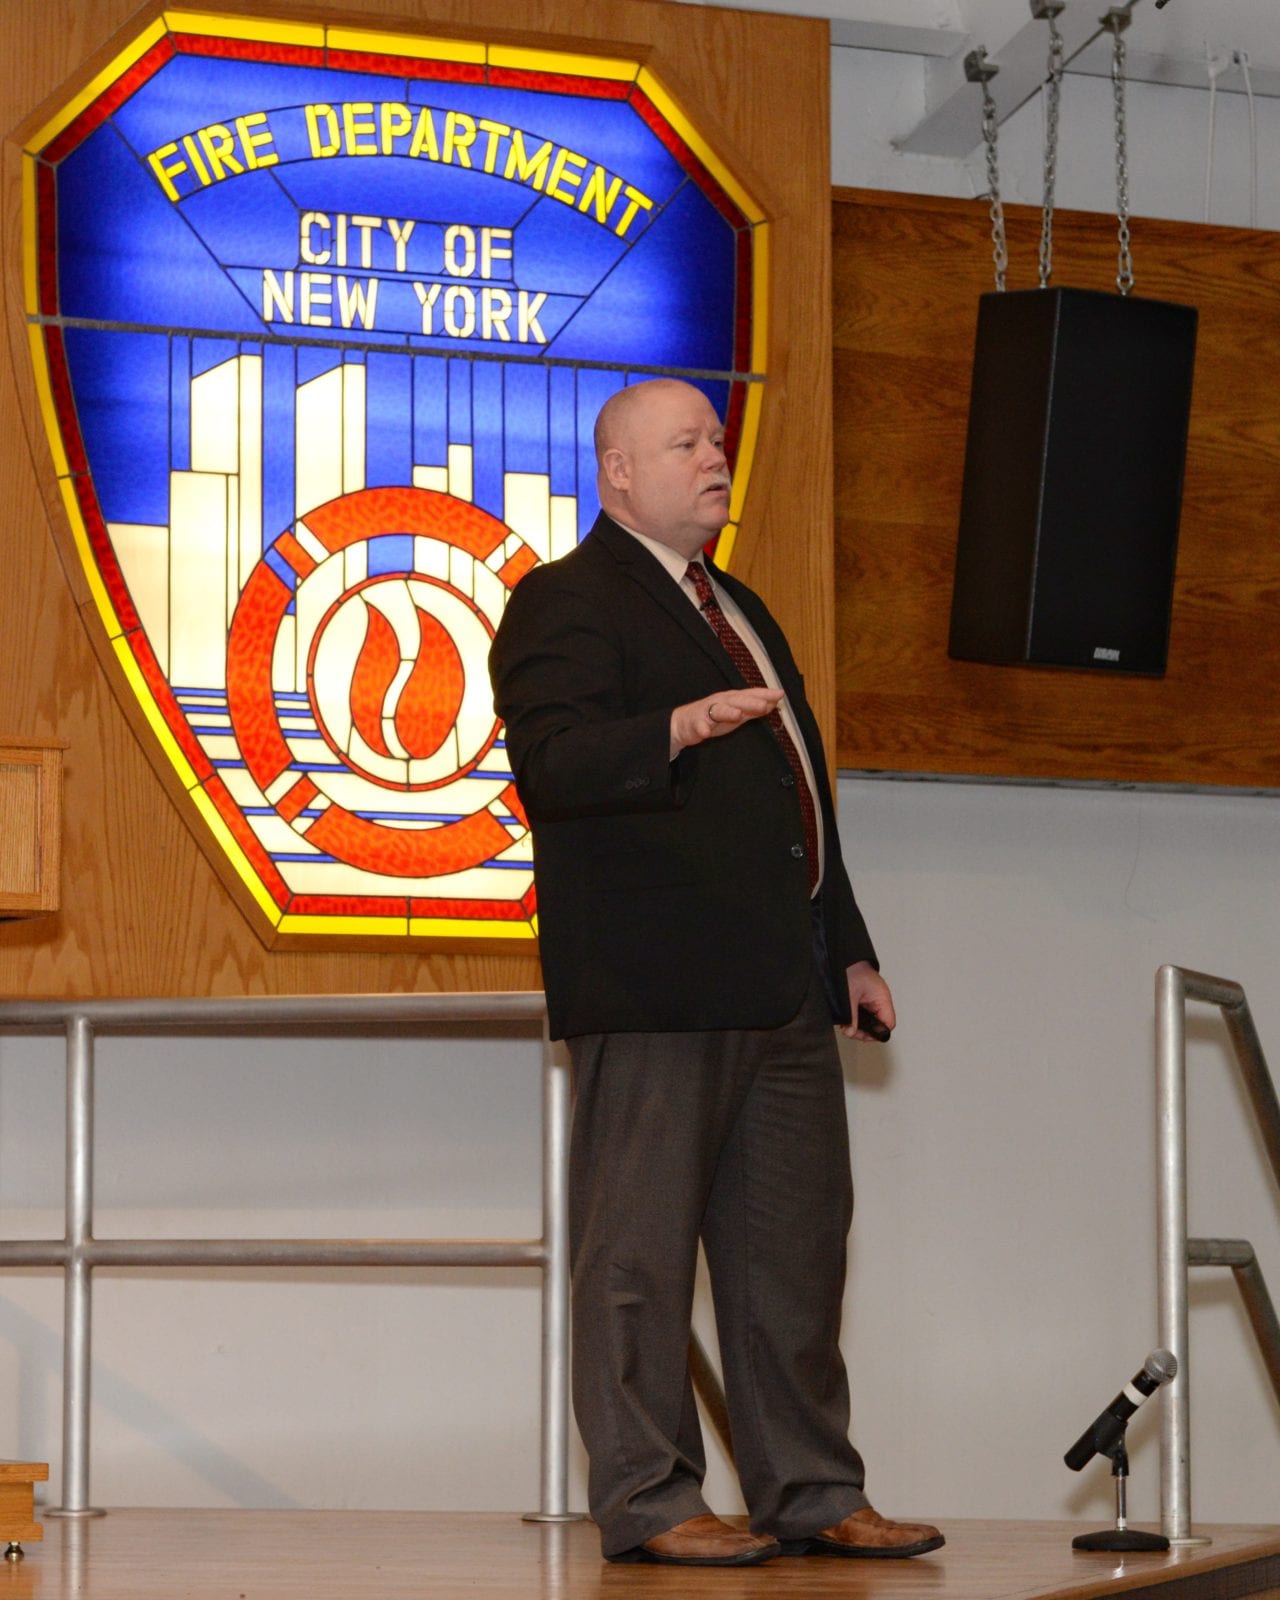 Shane Mooney, Planning Section Chief